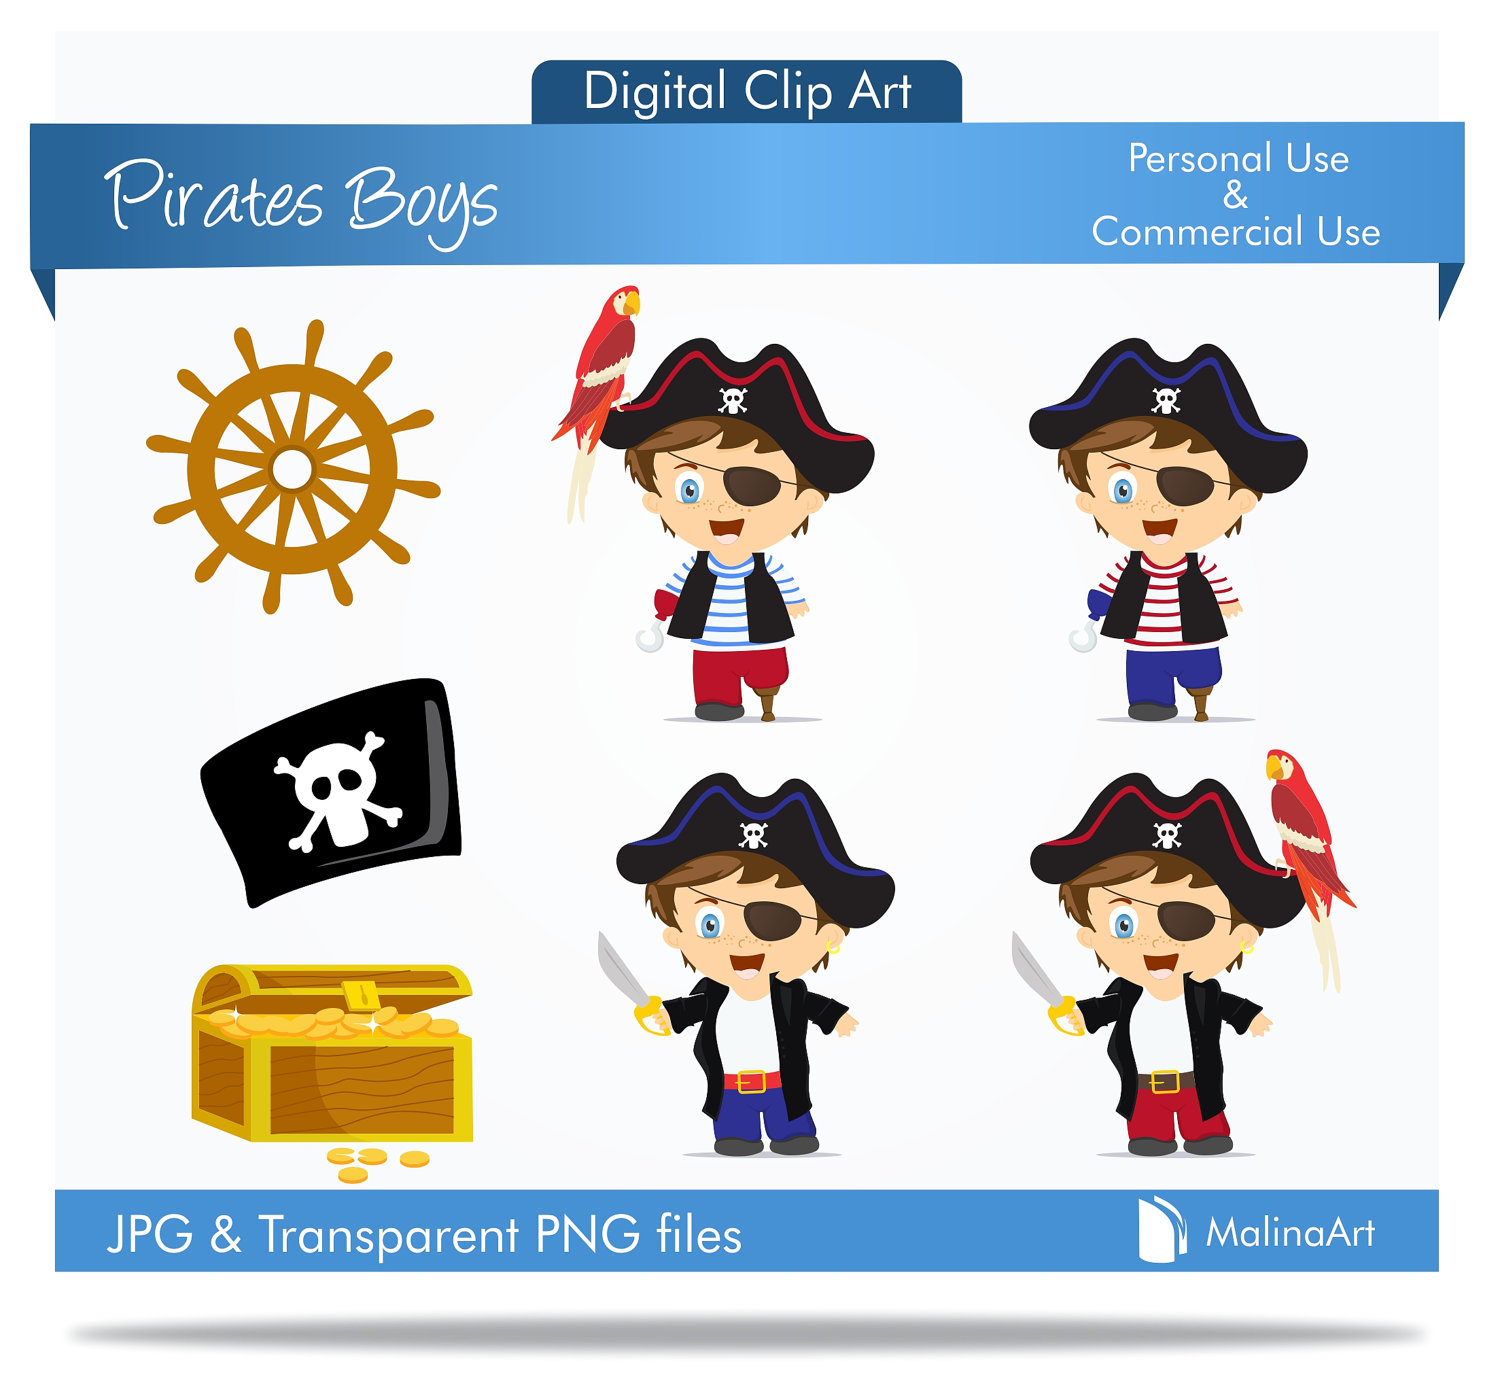 Pirate clipart free graphics of pirate flag image